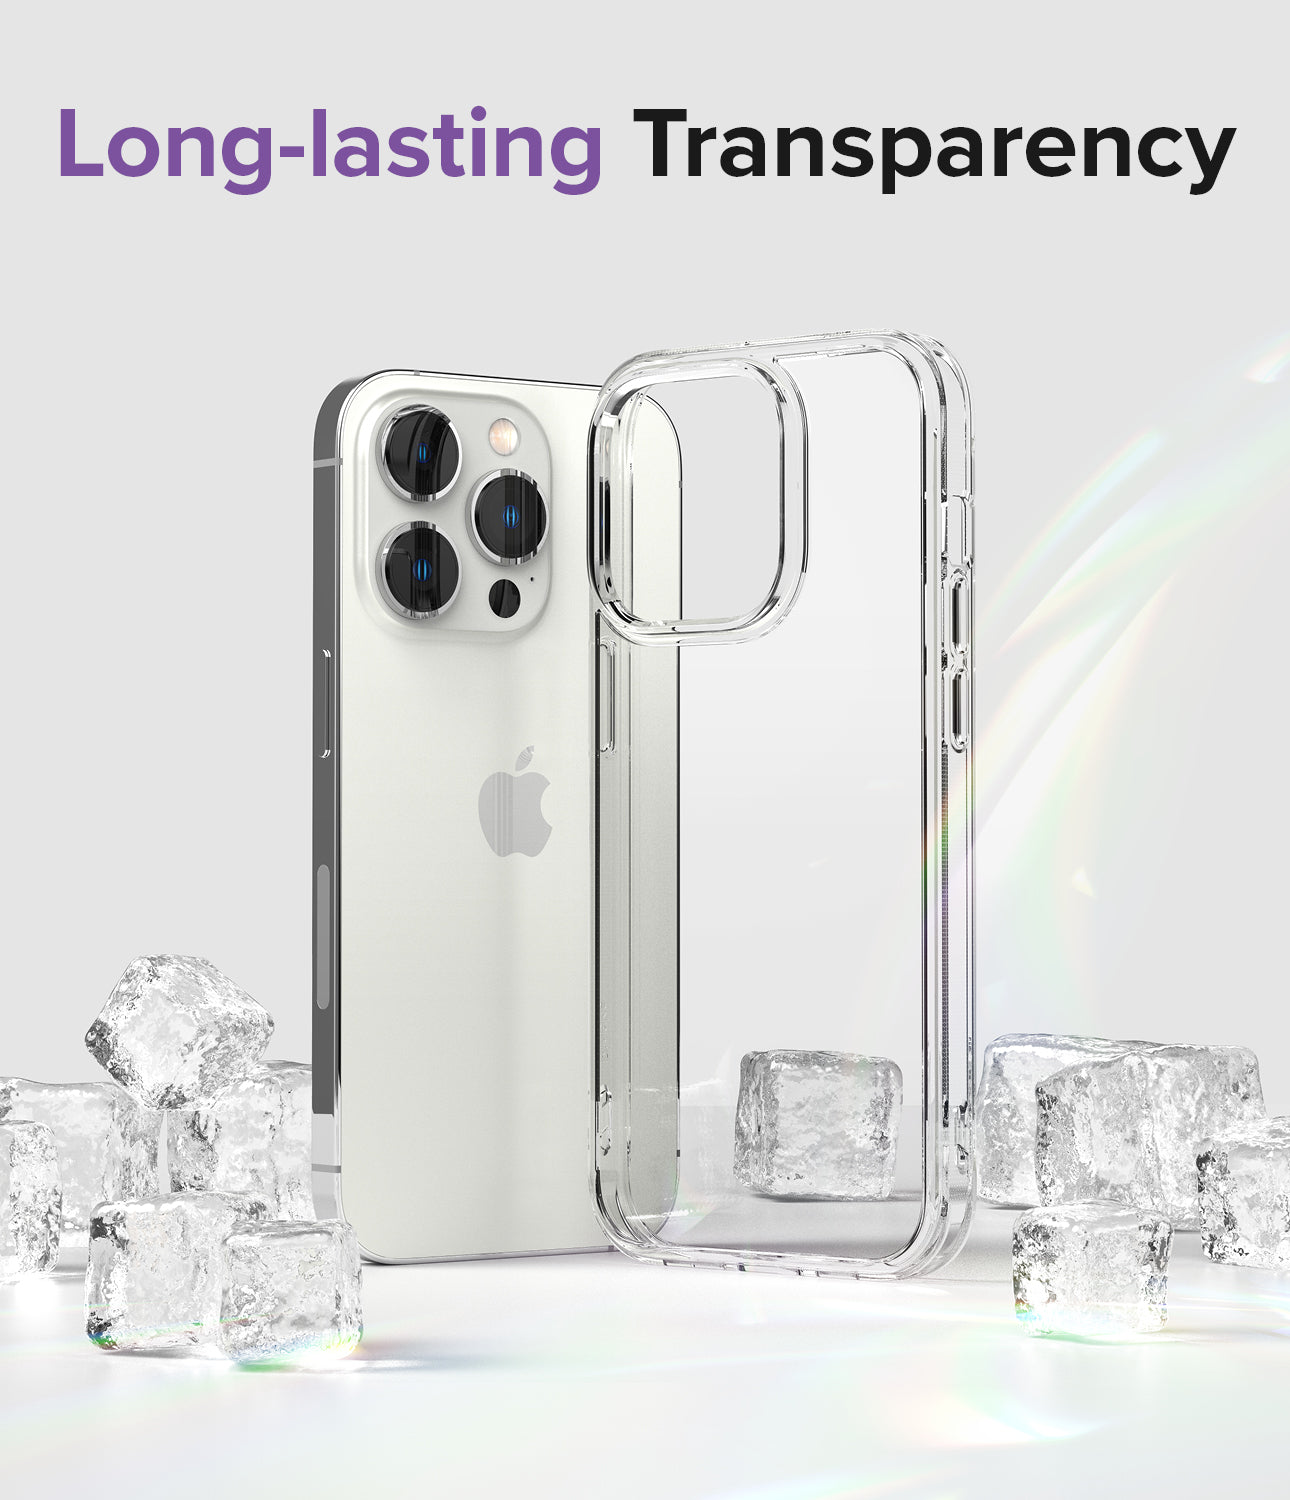 iPhone 14 Pro Max Case | Fusion - Long-lasting Transparency